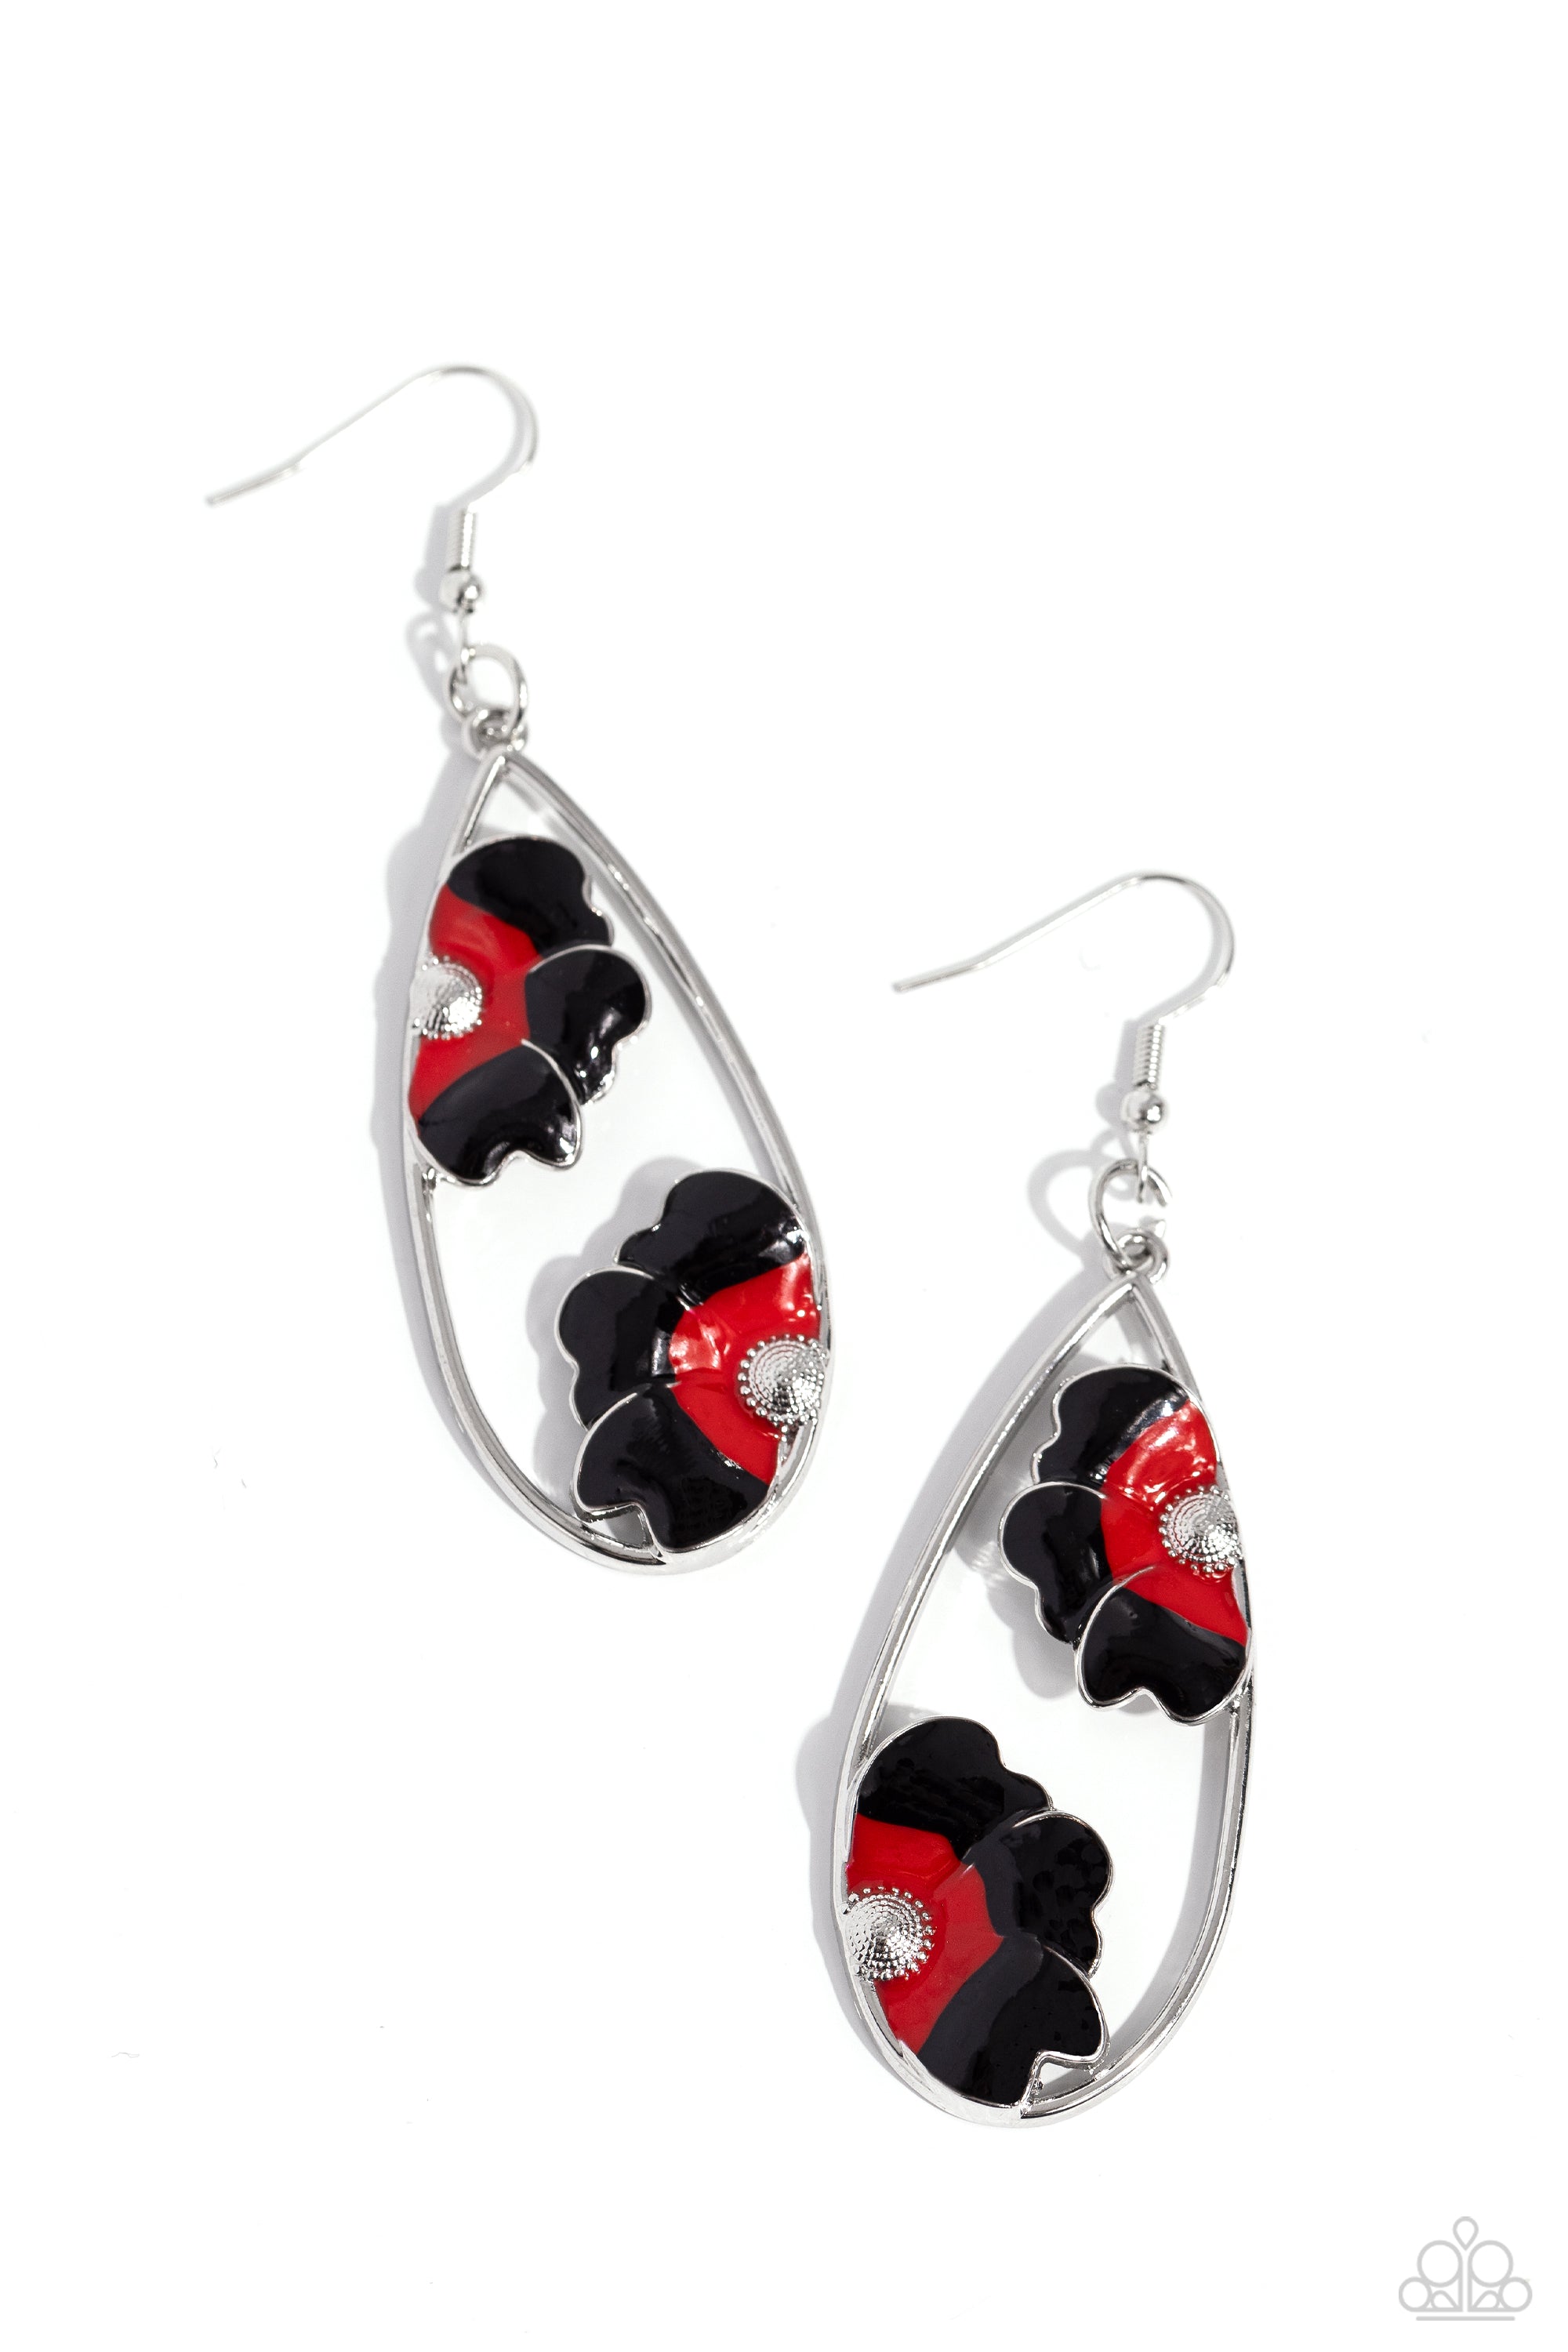 Airily Abloom Black & Red Flower Earrings - Paparazzi Accessories- lightbox - CarasShop.com - $5 Jewelry by Cara Jewels